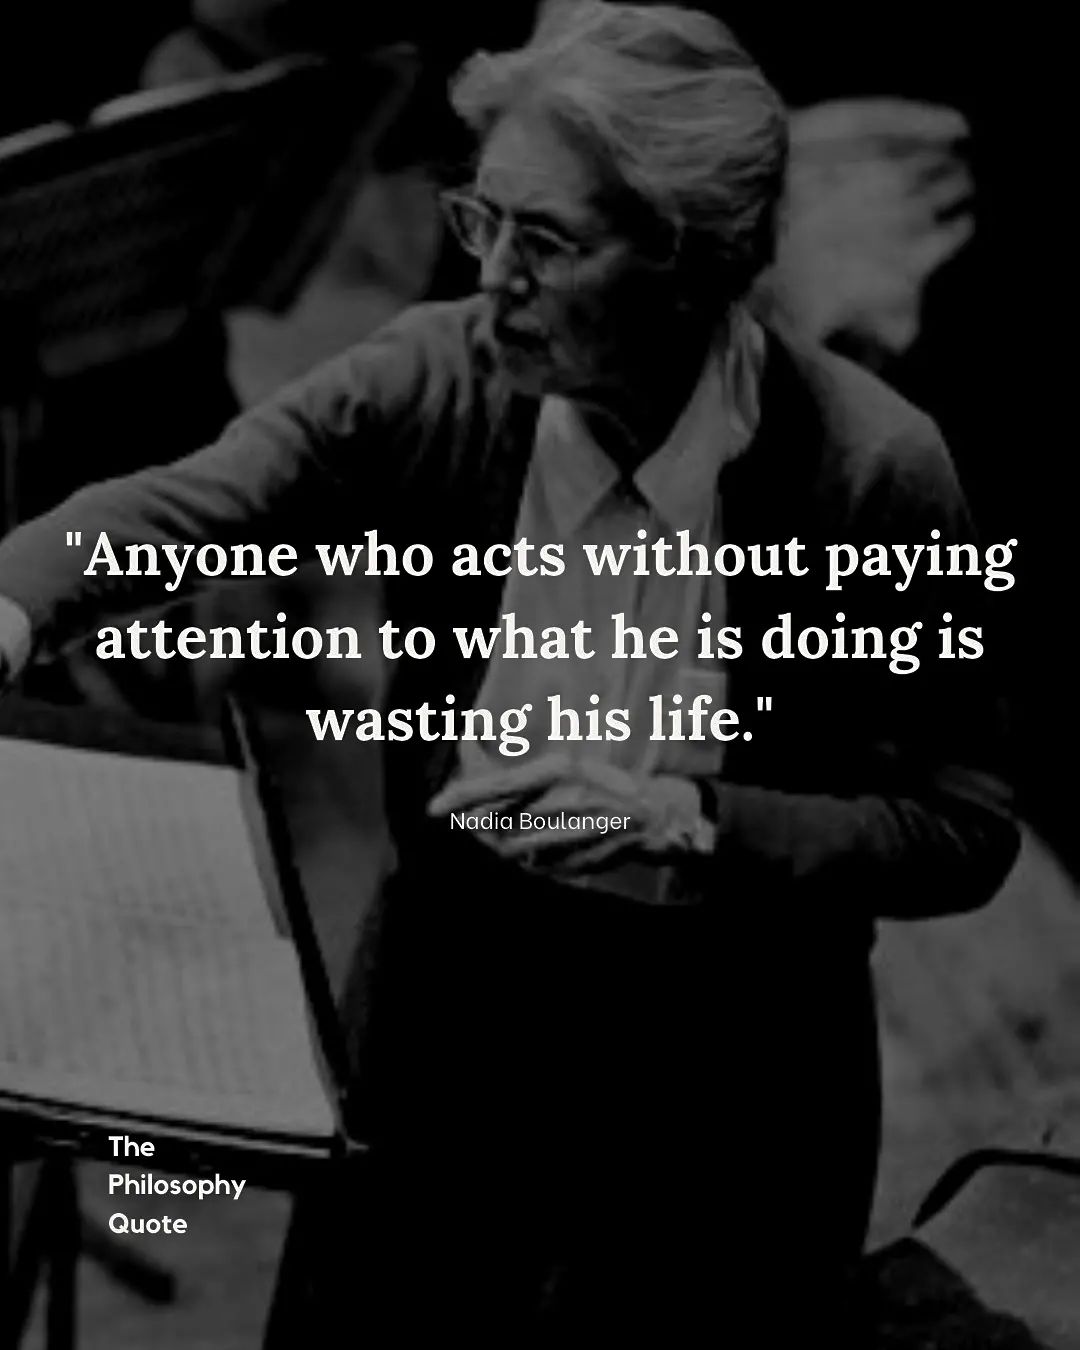 Anyone who acts without paying attention to what he is doing is wasting his life.